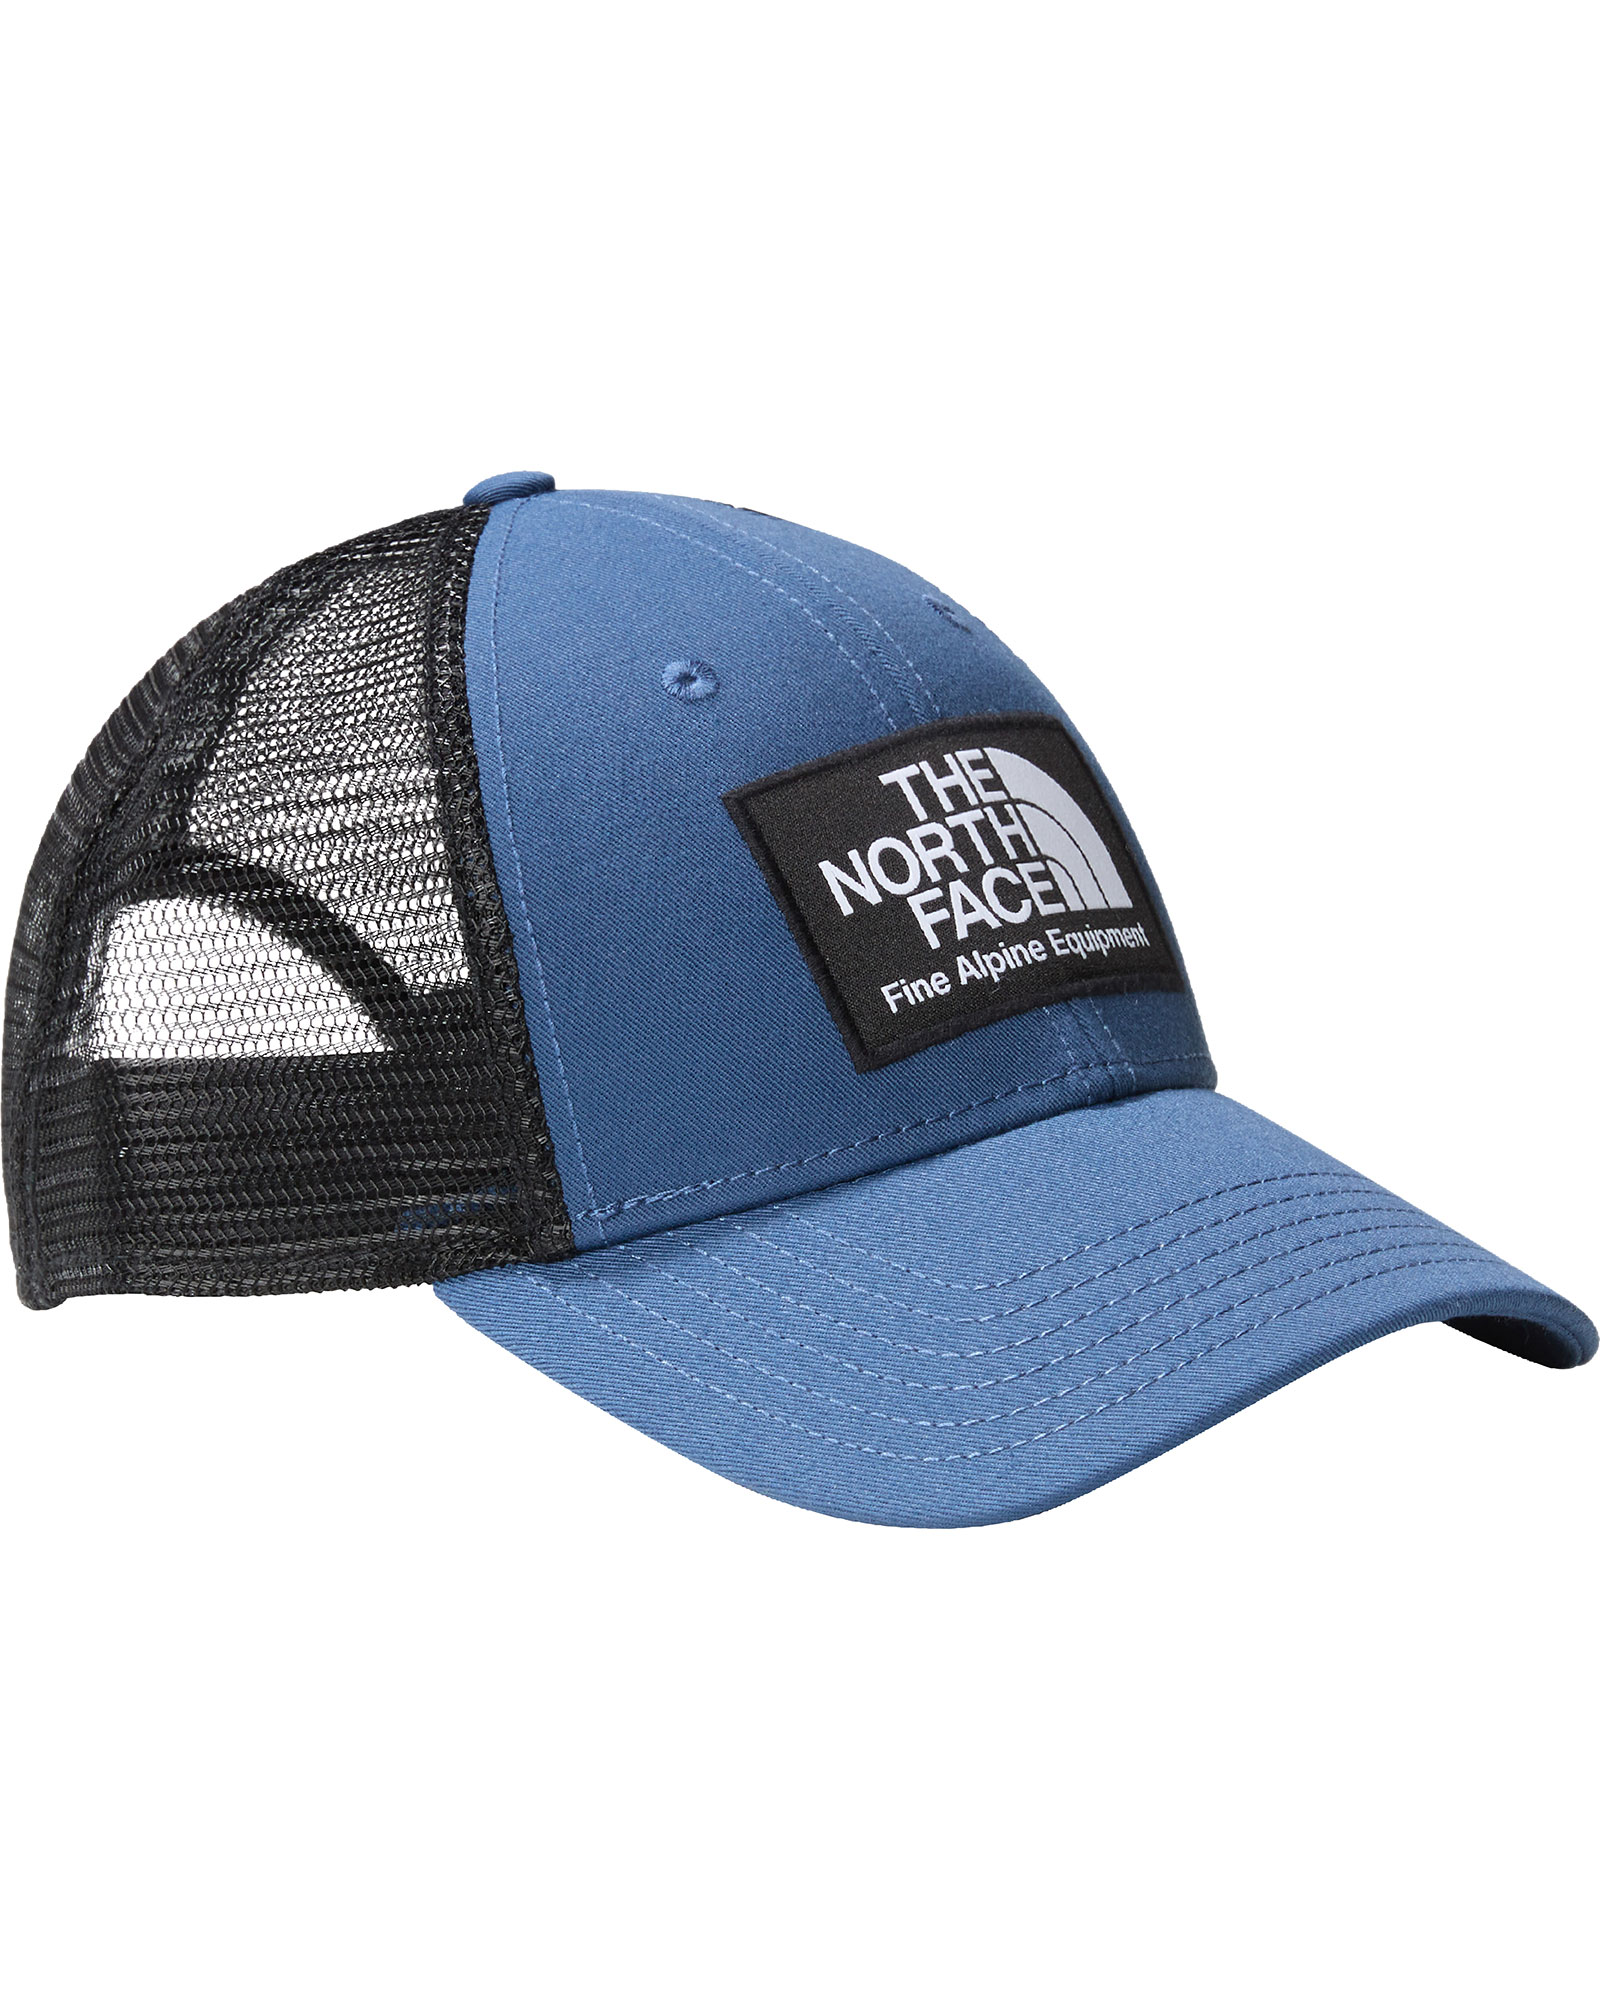 The North Face Mudder Trucker Hat - Shady Blue